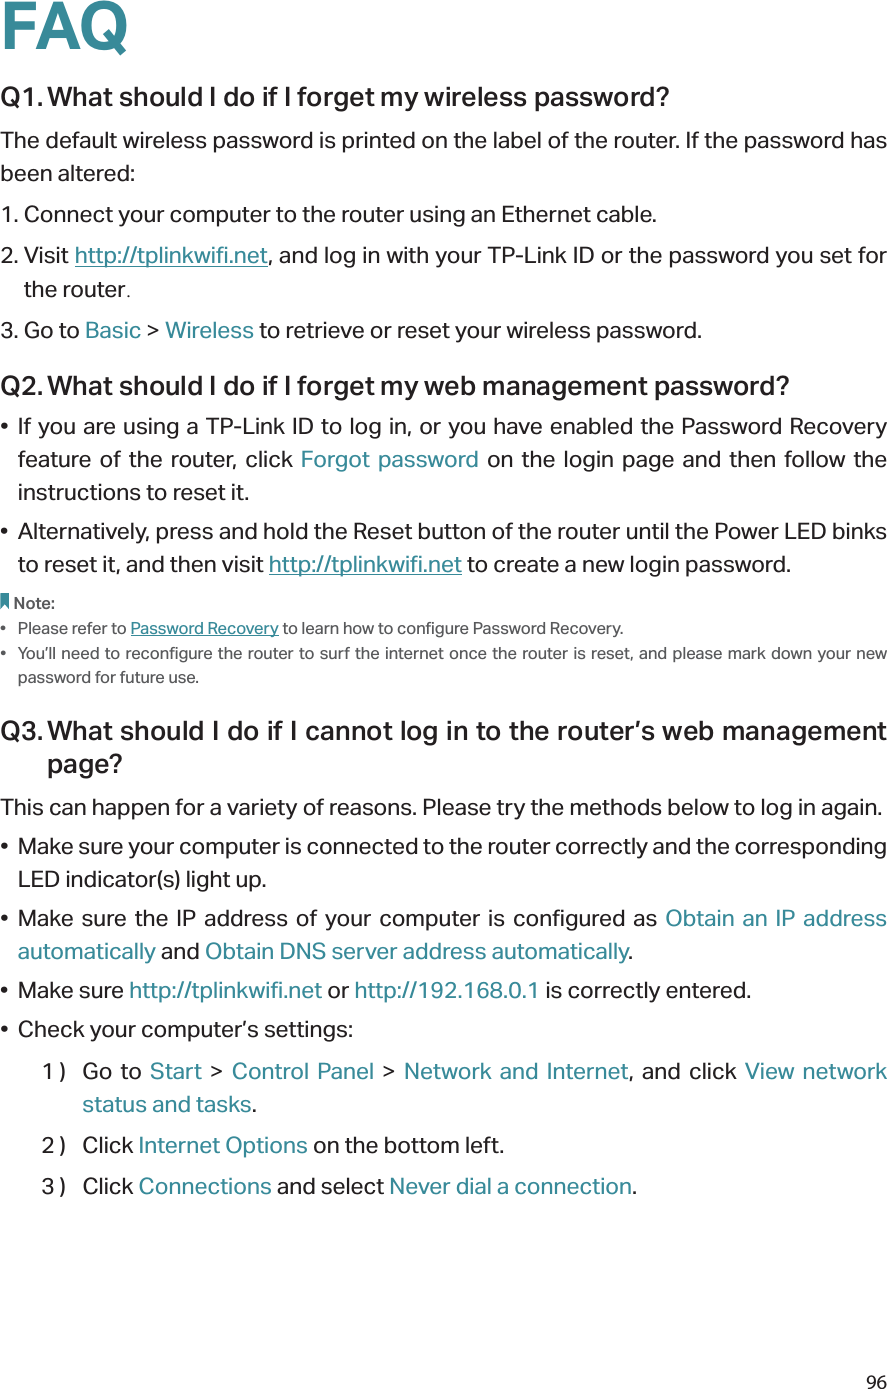 96FAQQ1. What should I do if I forget my wireless password?The default wireless password is printed on the label of the router. If the password has been altered:1. Connect your computer to the router using an Ethernet cable. 2. Visit http://tplinkwifi.net, and log in with your TP-Link ID or the password you set for the router.3. Go to Basic &gt; Wireless to retrieve or reset your wireless password.Q2. What should I do if I forget my web management password?• If you are using a TP-Link ID to log in, or you have enabled the Password Recovery feature of the router, click Forgot password on the login page and then follow the instructions to reset it.•  Alternatively, press and hold the Reset button of the router until the Power LED binks to reset it, and then visit http://tplinkwifi.net to create a new login password.Note: •  Please refer to Password Recovery to learn how to configure Password Recovery.•  You’ll need to reconfigure the router to surf the internet once the router is reset, and please mark down your new password for future use.Q3. What should I do if I cannot log in to the router’s web management page?This can happen for a variety of reasons. Please try the methods below to log in again.•  Make sure your computer is connected to the router correctly and the corresponding LED indicator(s) light up.• Make sure the IP address of your computer is configured as Obtain an IP address automatically and Obtain DNS server address automatically.• Make sure http://tplinkwifi.net or http://192.168.0.1 is correctly entered.•  Check your computer’s settings:1 )  Go  to  Start &gt; Control Panel &gt; Network and Internet, and click View network status and tasks.2 )  Click Internet Options on the bottom left.3 )  Click Connections and select Never dial a connection.